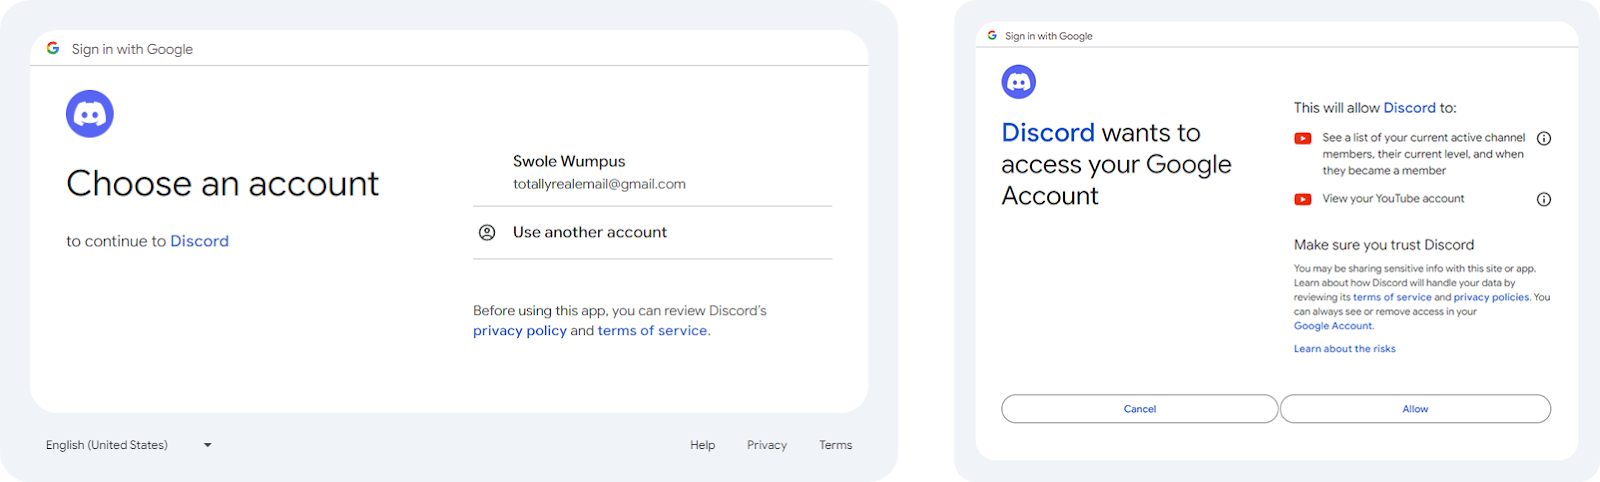 The Google Account confirmation screen of Discord connection